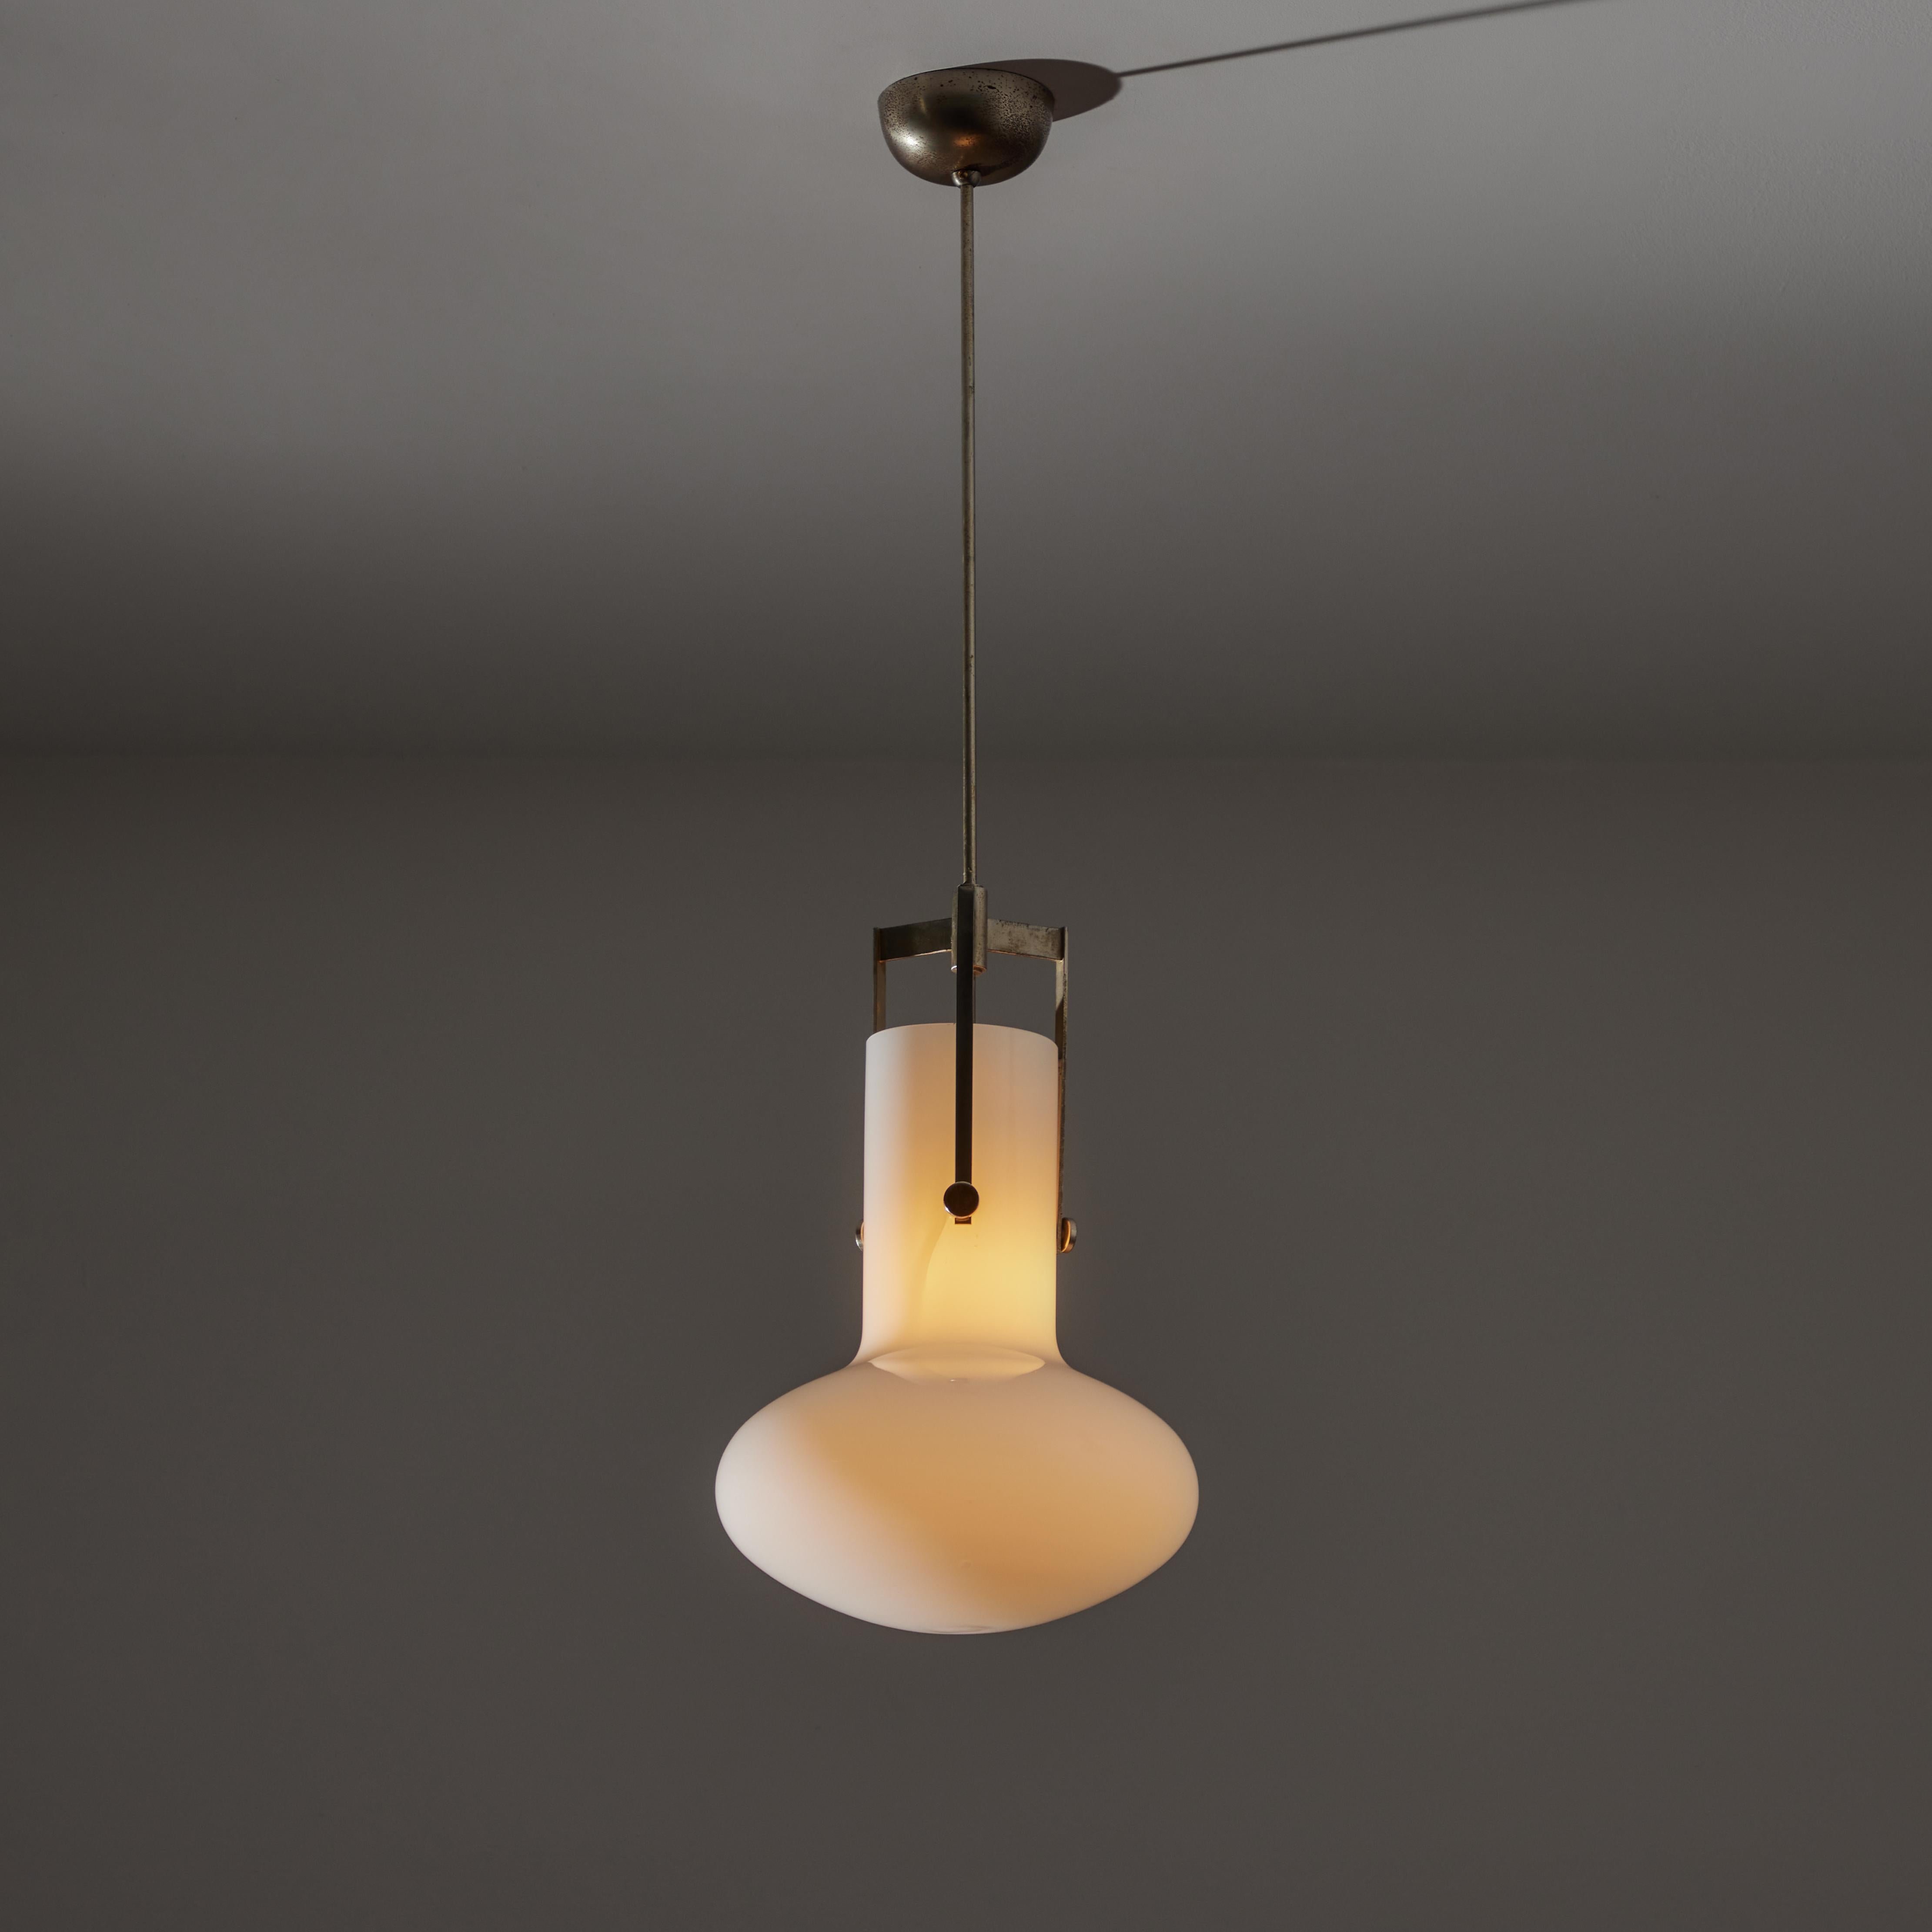 Ceiling light by Ignazio Gardella for Azucena. Designed and manufactured in Italy, in 1958. Opaline glass diffuser with patinated brass armature. Wired for U.S. standards. Original canopy with custom brass ceiling plate. Holds one E27 socket type,